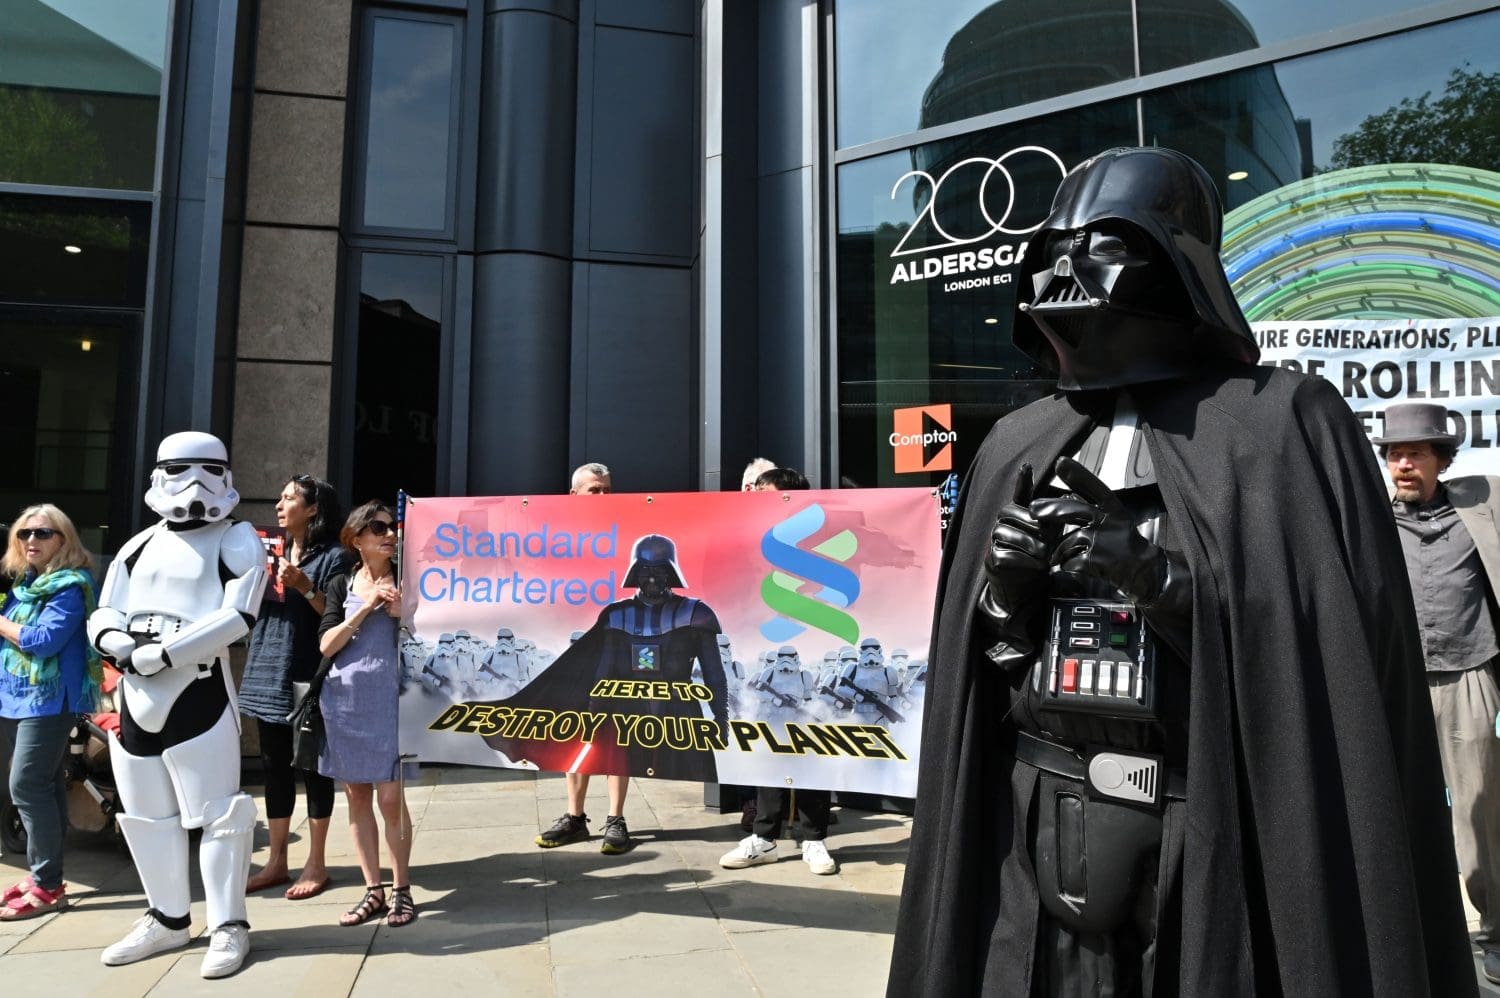 Darth Vader and a Storm Trooper alongside protesters with a banner that reads: Standard Chartered - Here to destroy your planet.